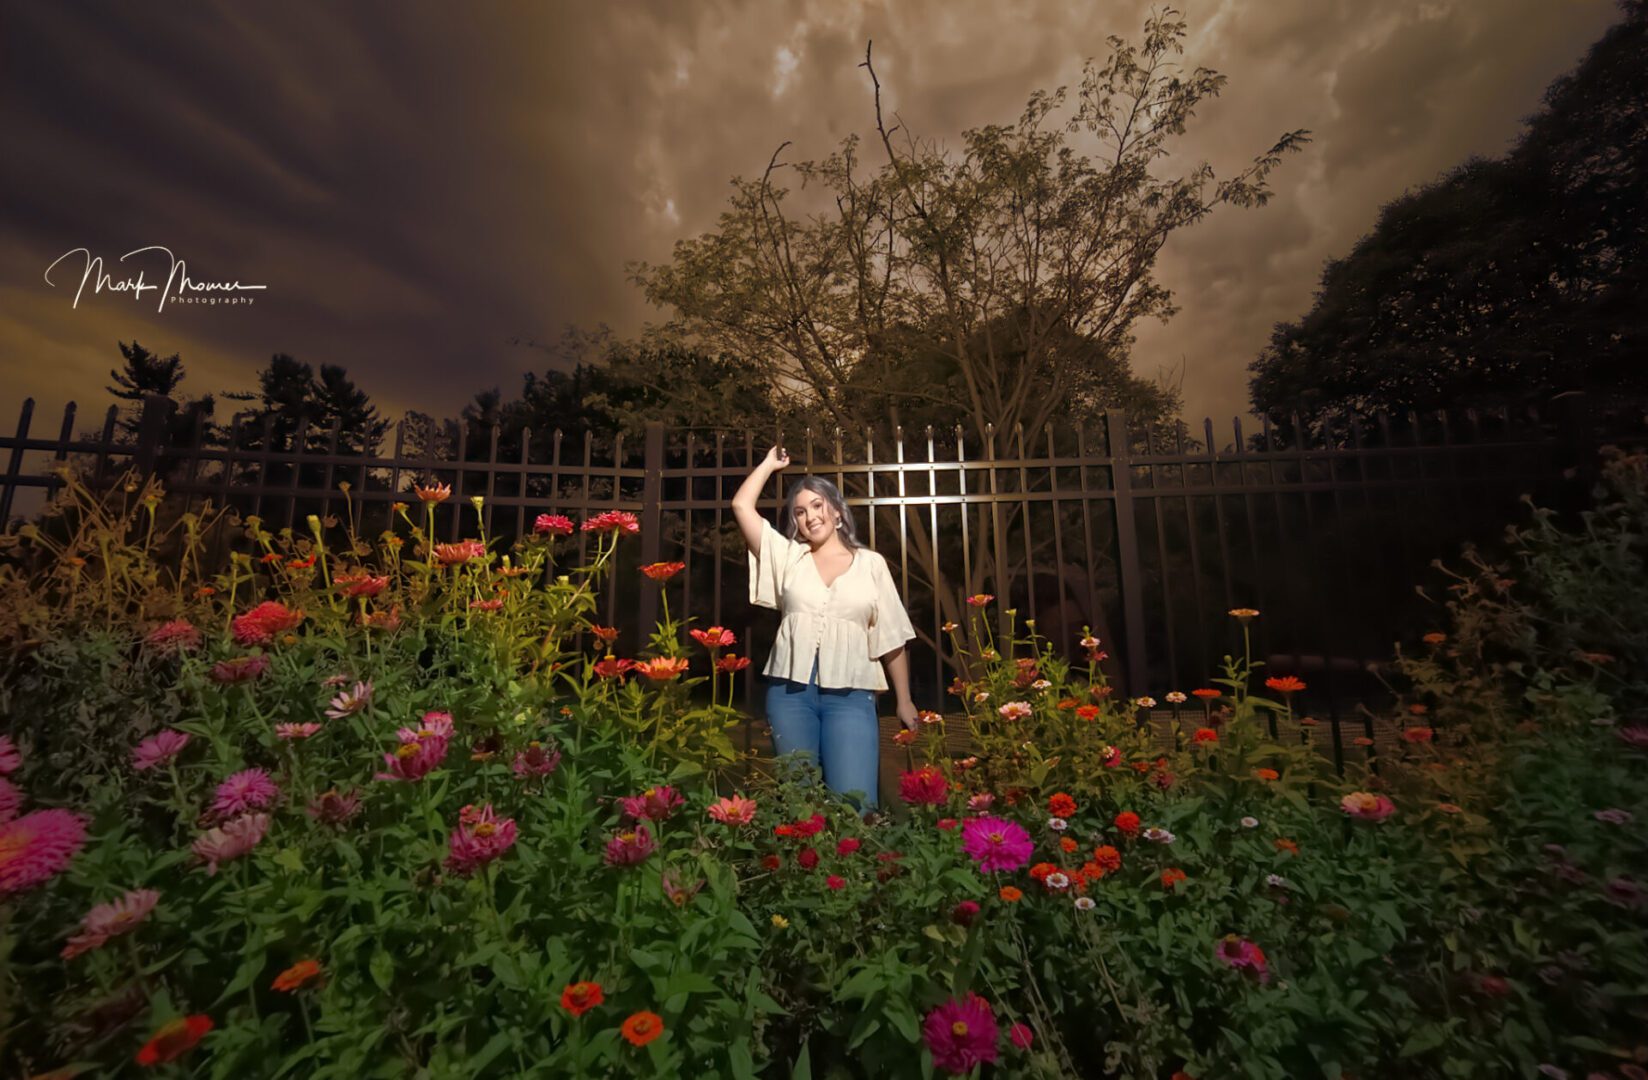 Senior picture at Hartwood Acres with dramatic sky